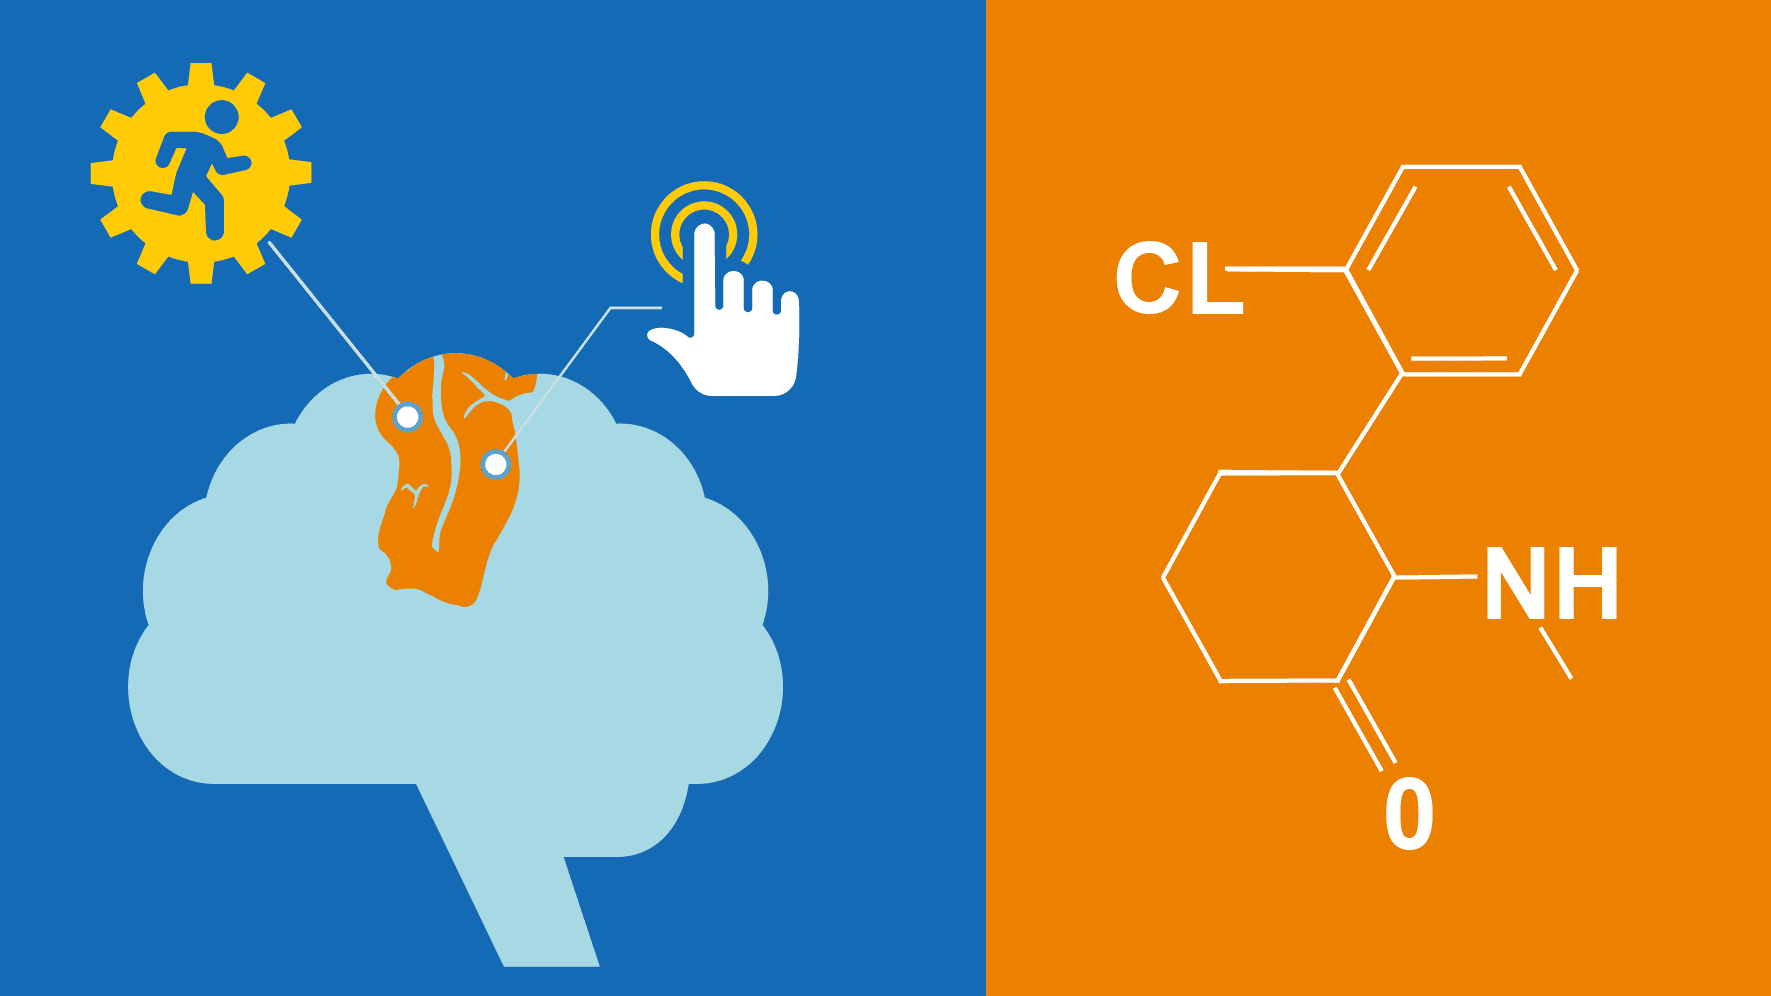 Artistic image of a light blue outline of a brain on a darker blue background, next to an orange background featuring a chemical molecule